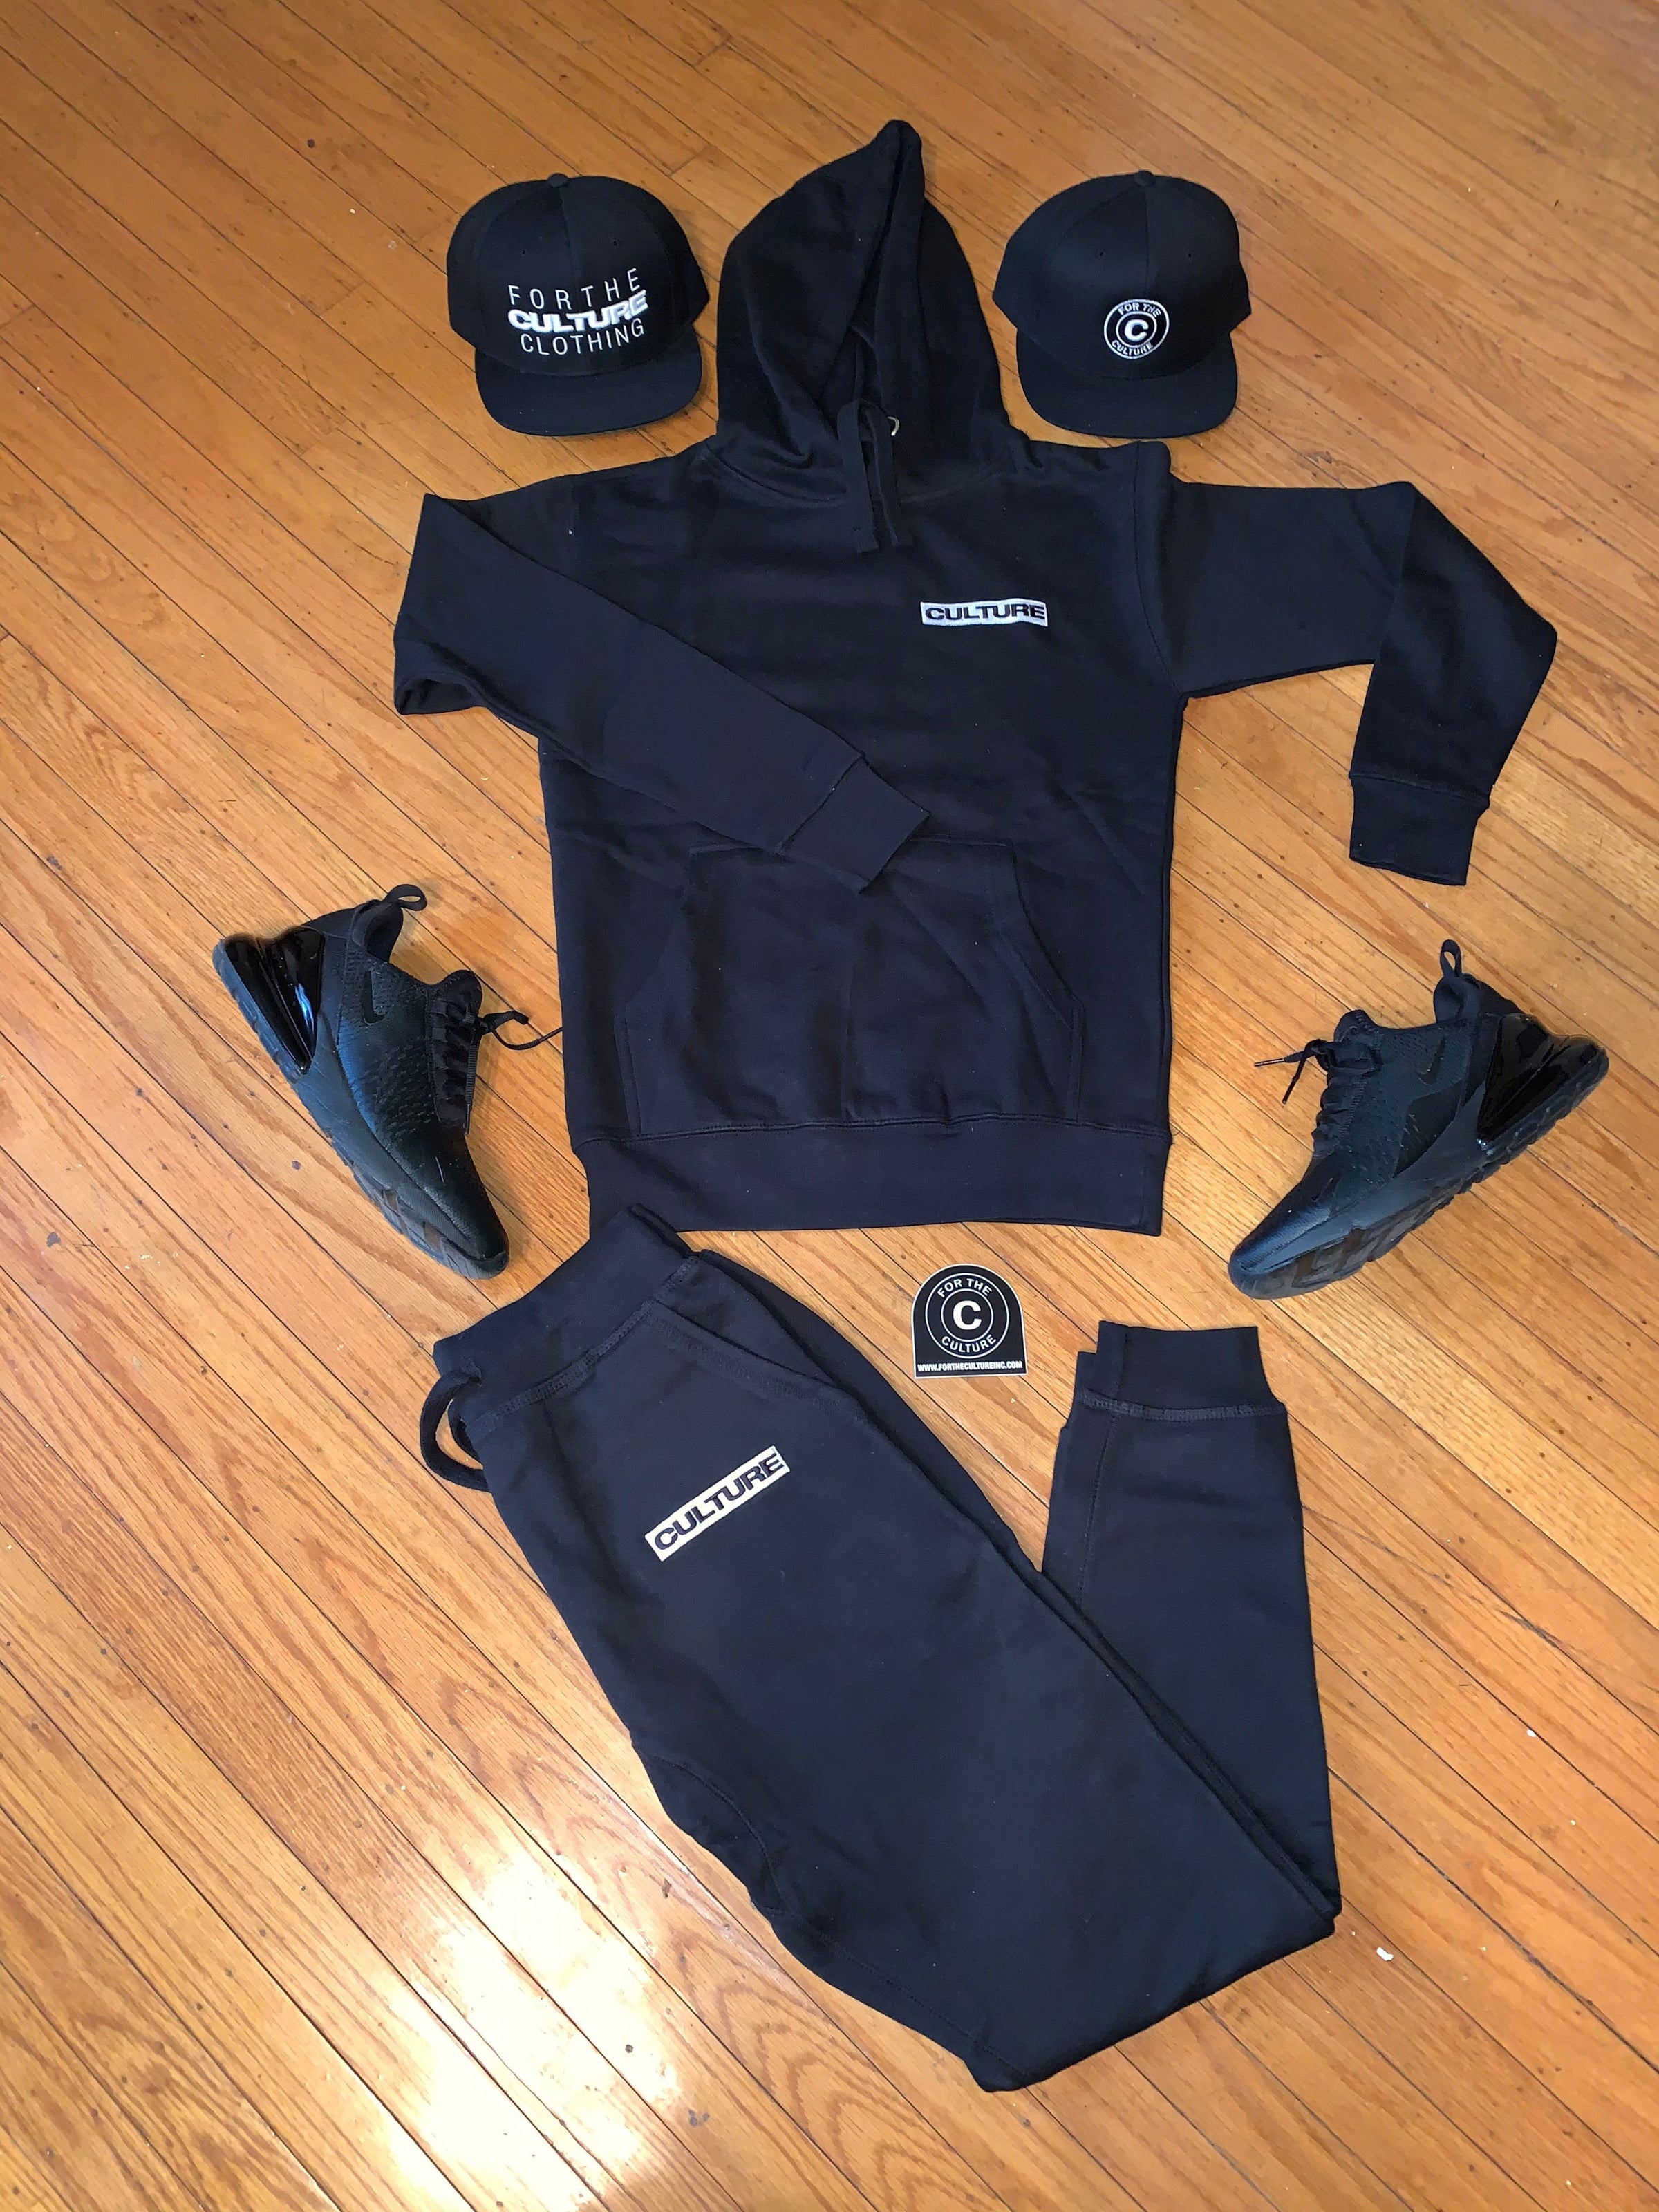 Block Culture Sweatsuit – For The Culture Clothing Inc.